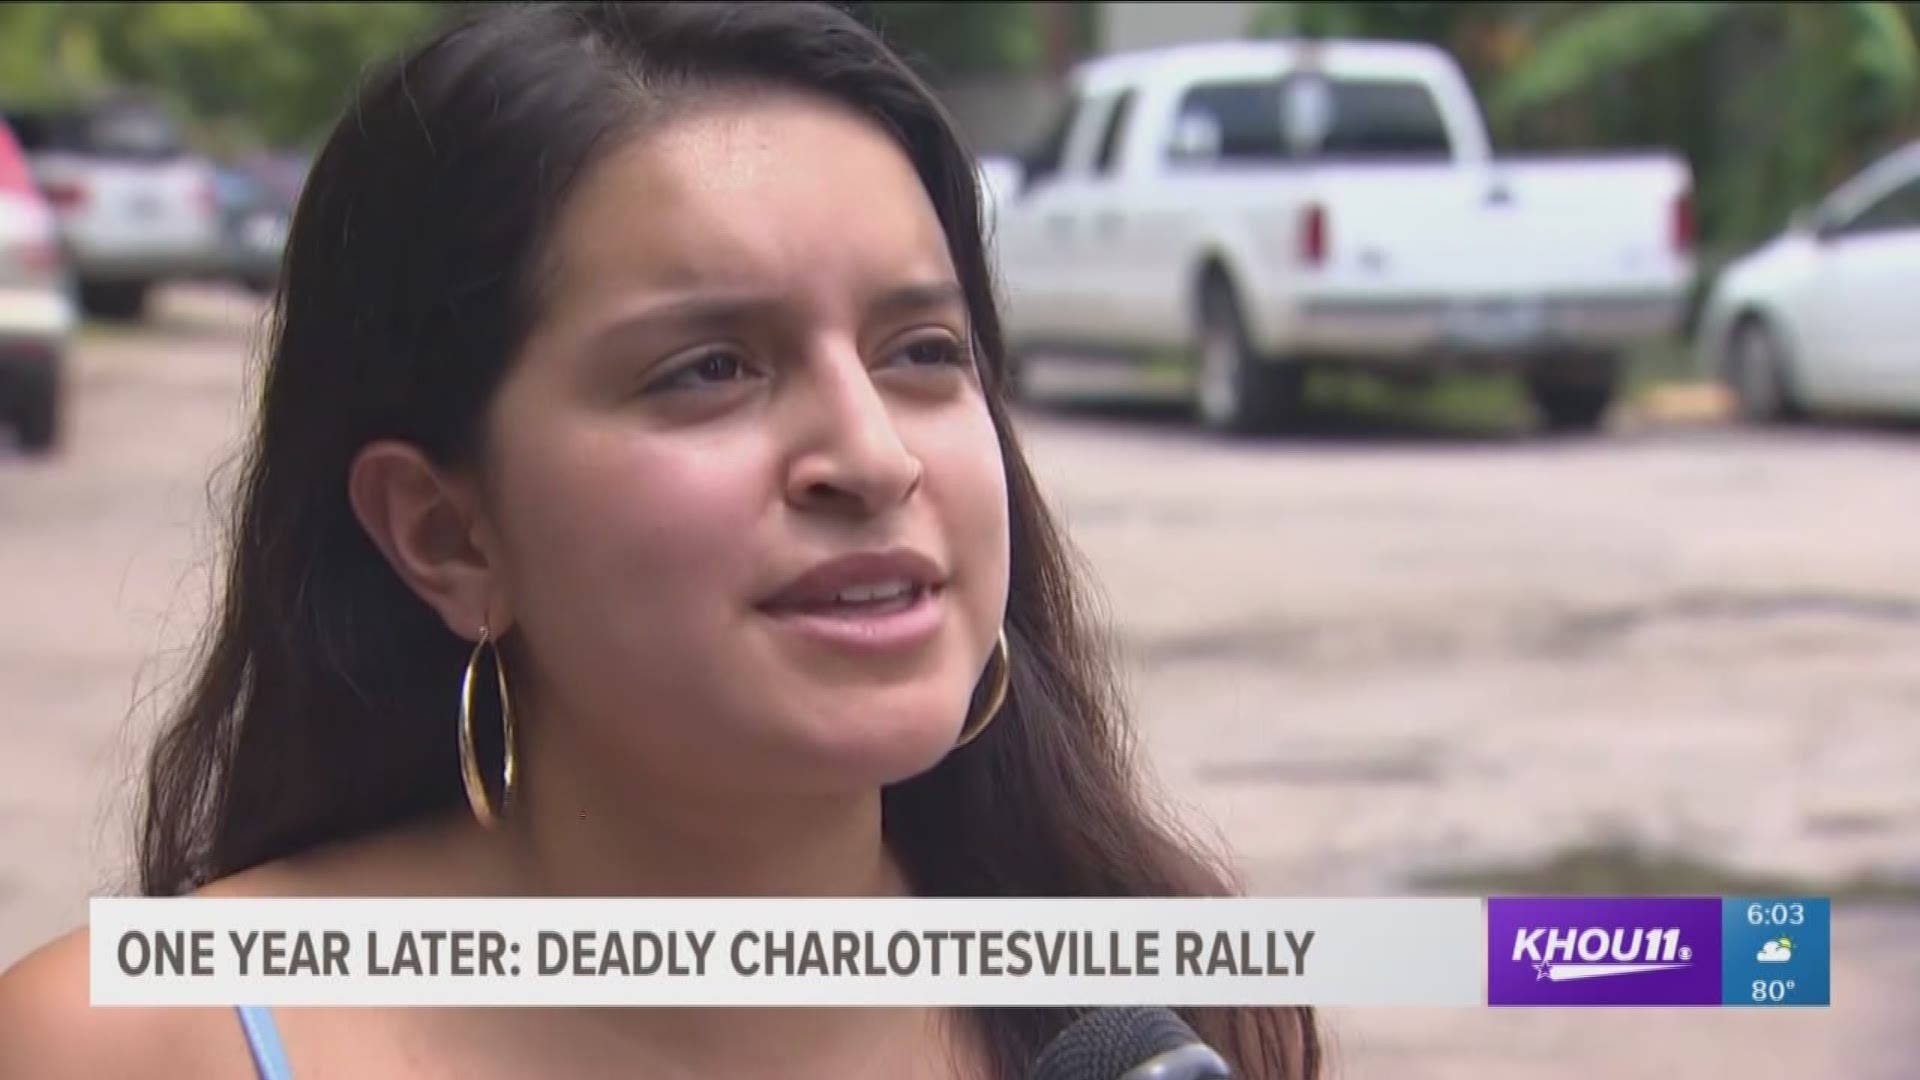 Houston native Natalie Romero was hospitalized last year after a driver plowed into a the crowd at a rally in Charlottesville, Virginia. One person was killed. Romero reflects with KHOU 11 News.